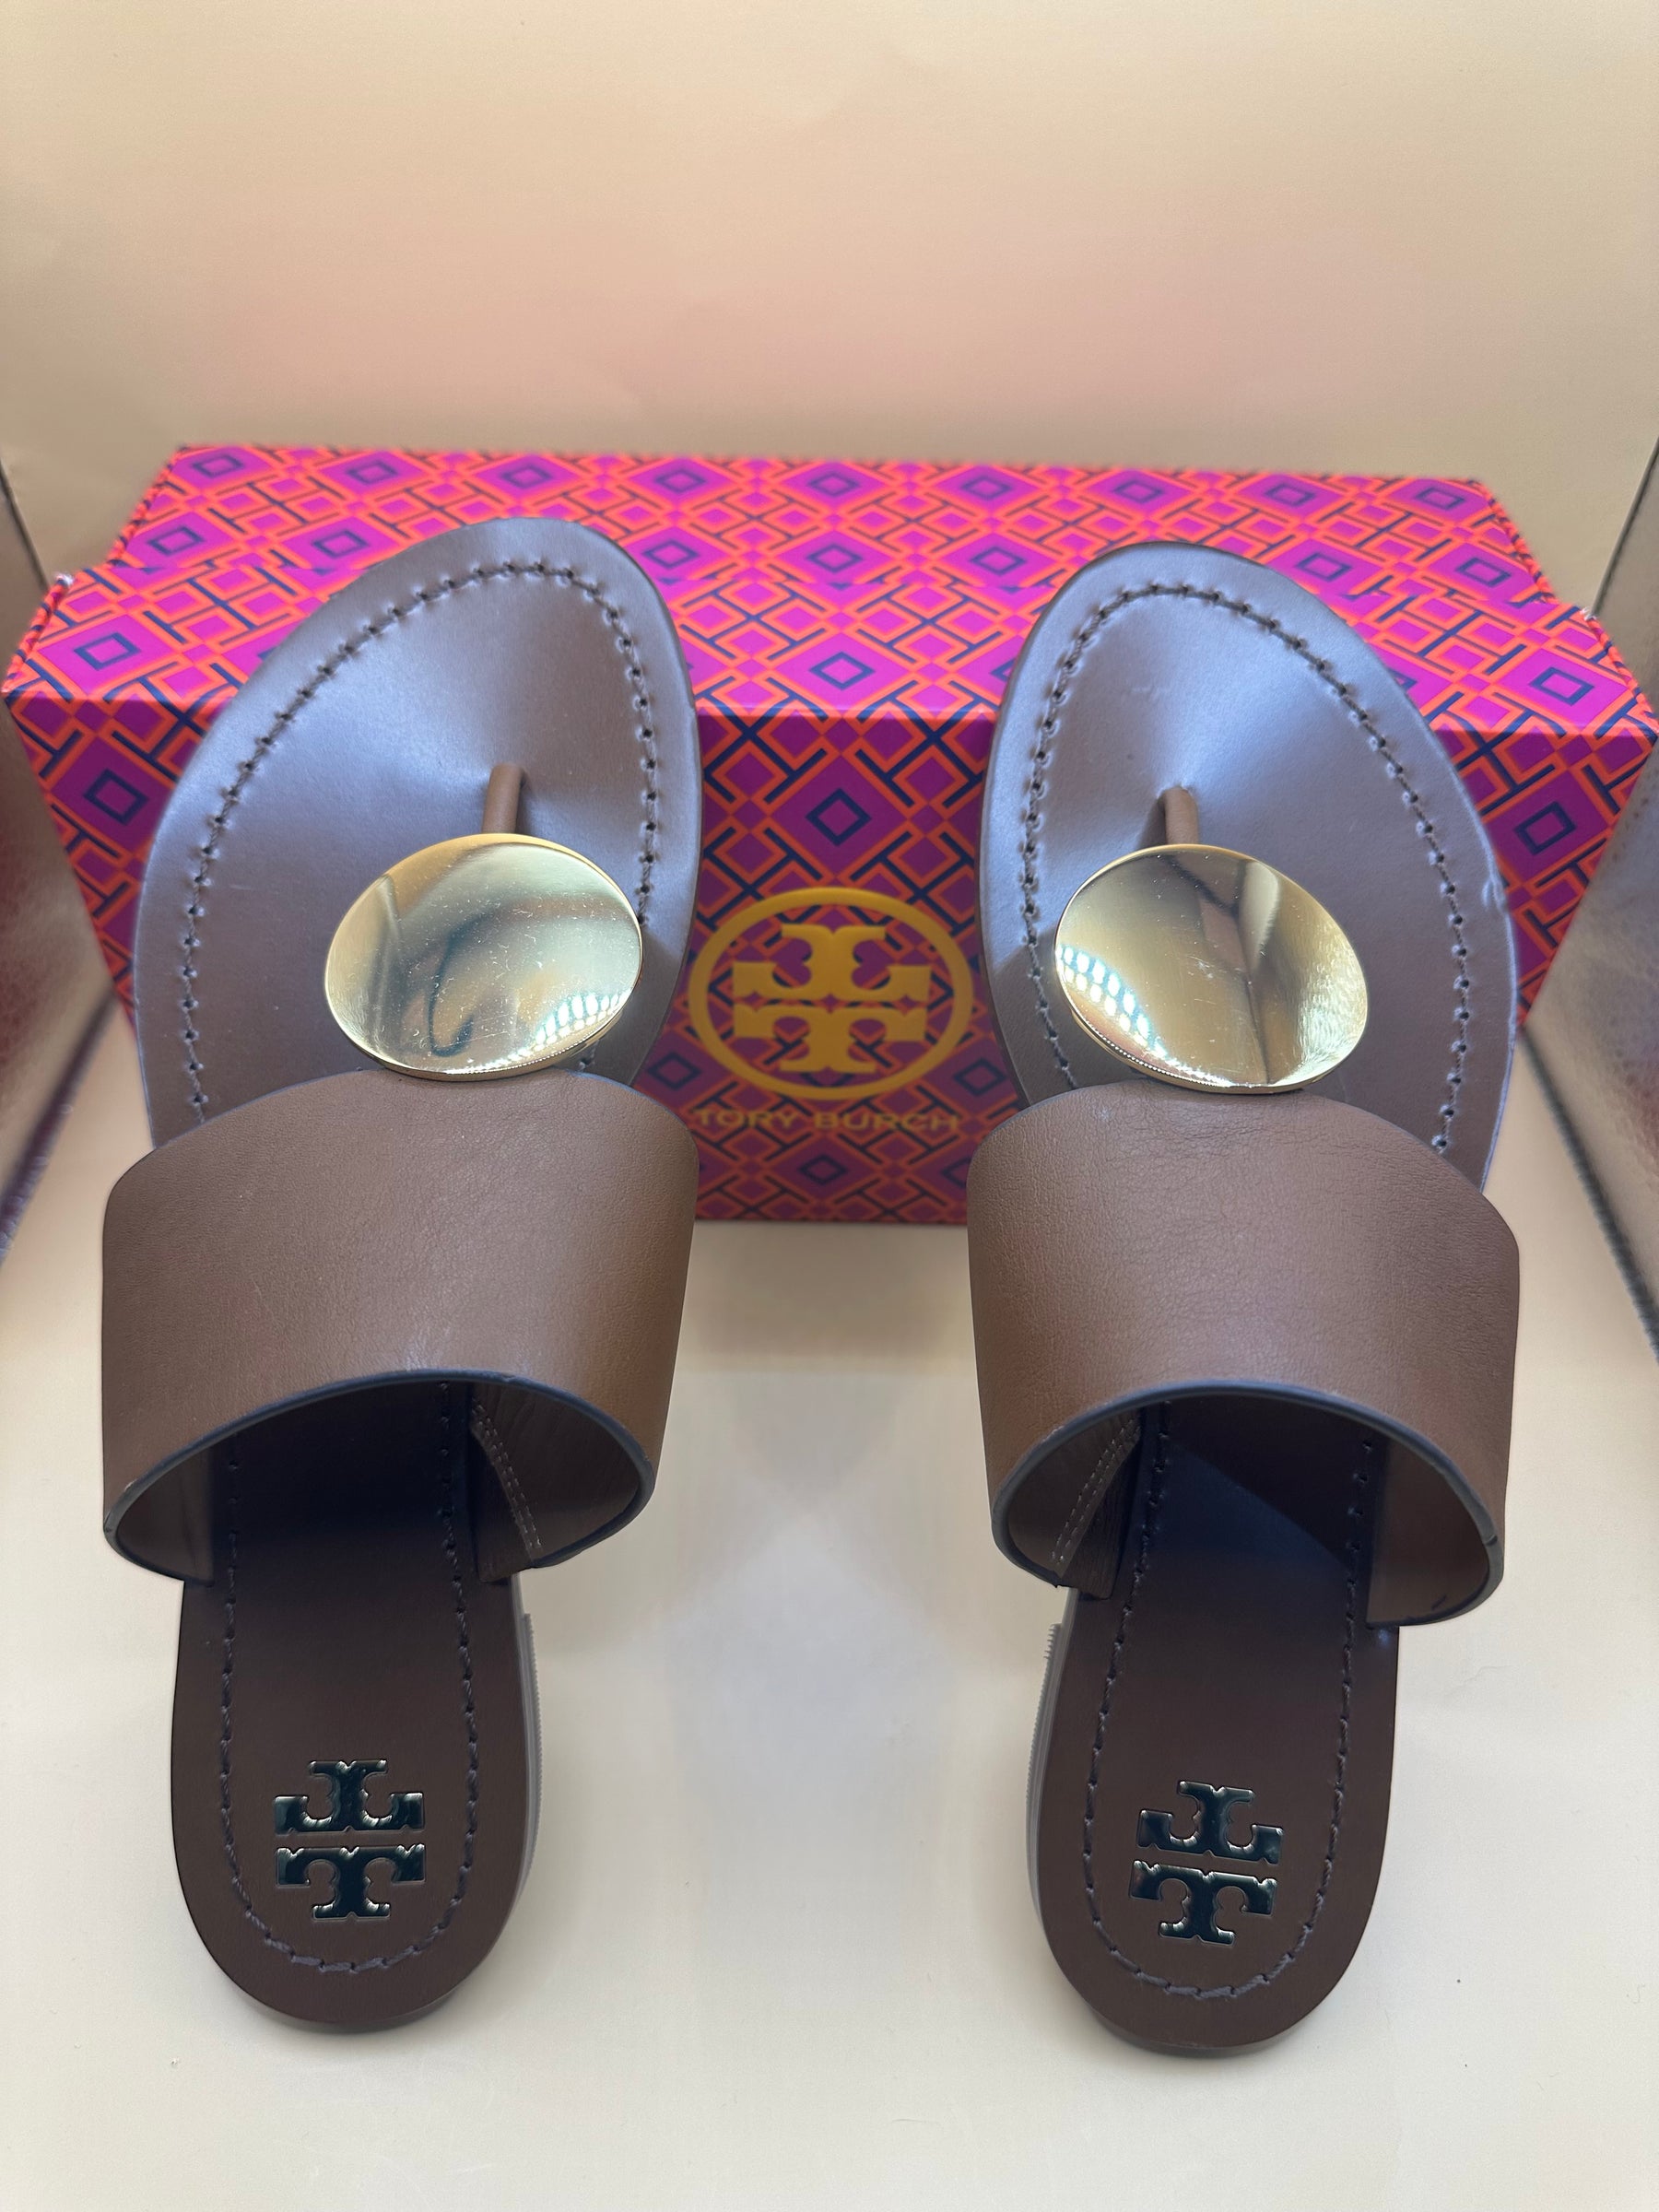 Tory Burch Brown Leather Patos Disc Sandal Size 8